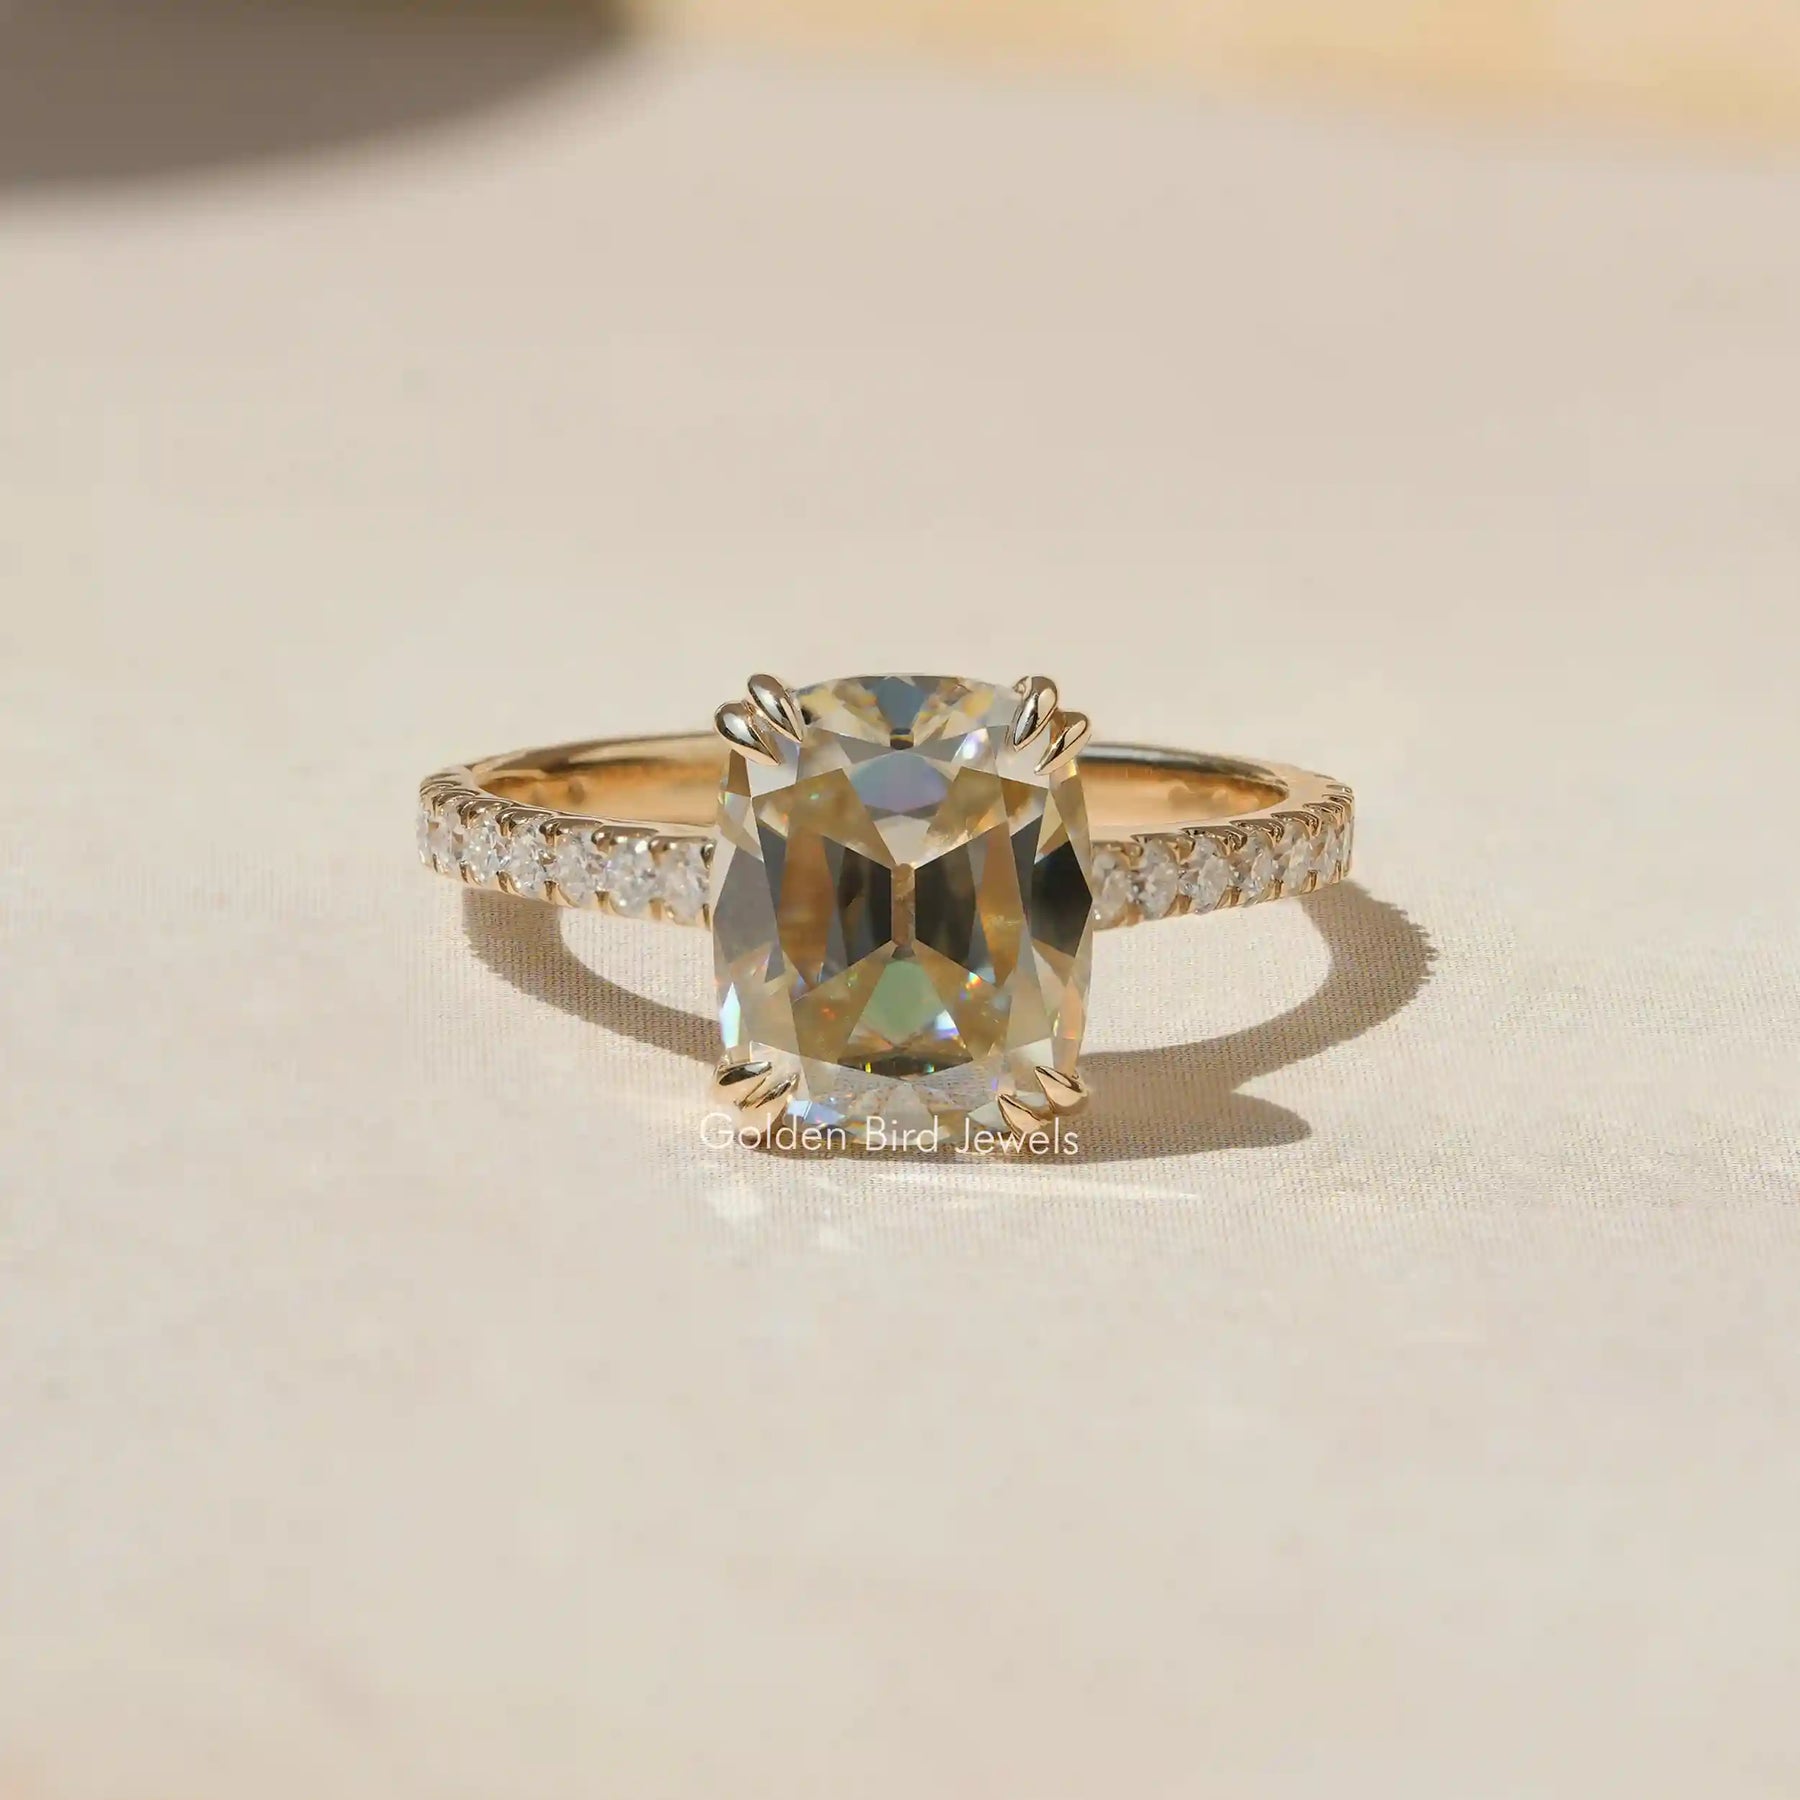 [Old Mine Cushion Cut Moissanite Engagement Ring Made In 18k Yellow Gold]-[Golden Bird Jewels]